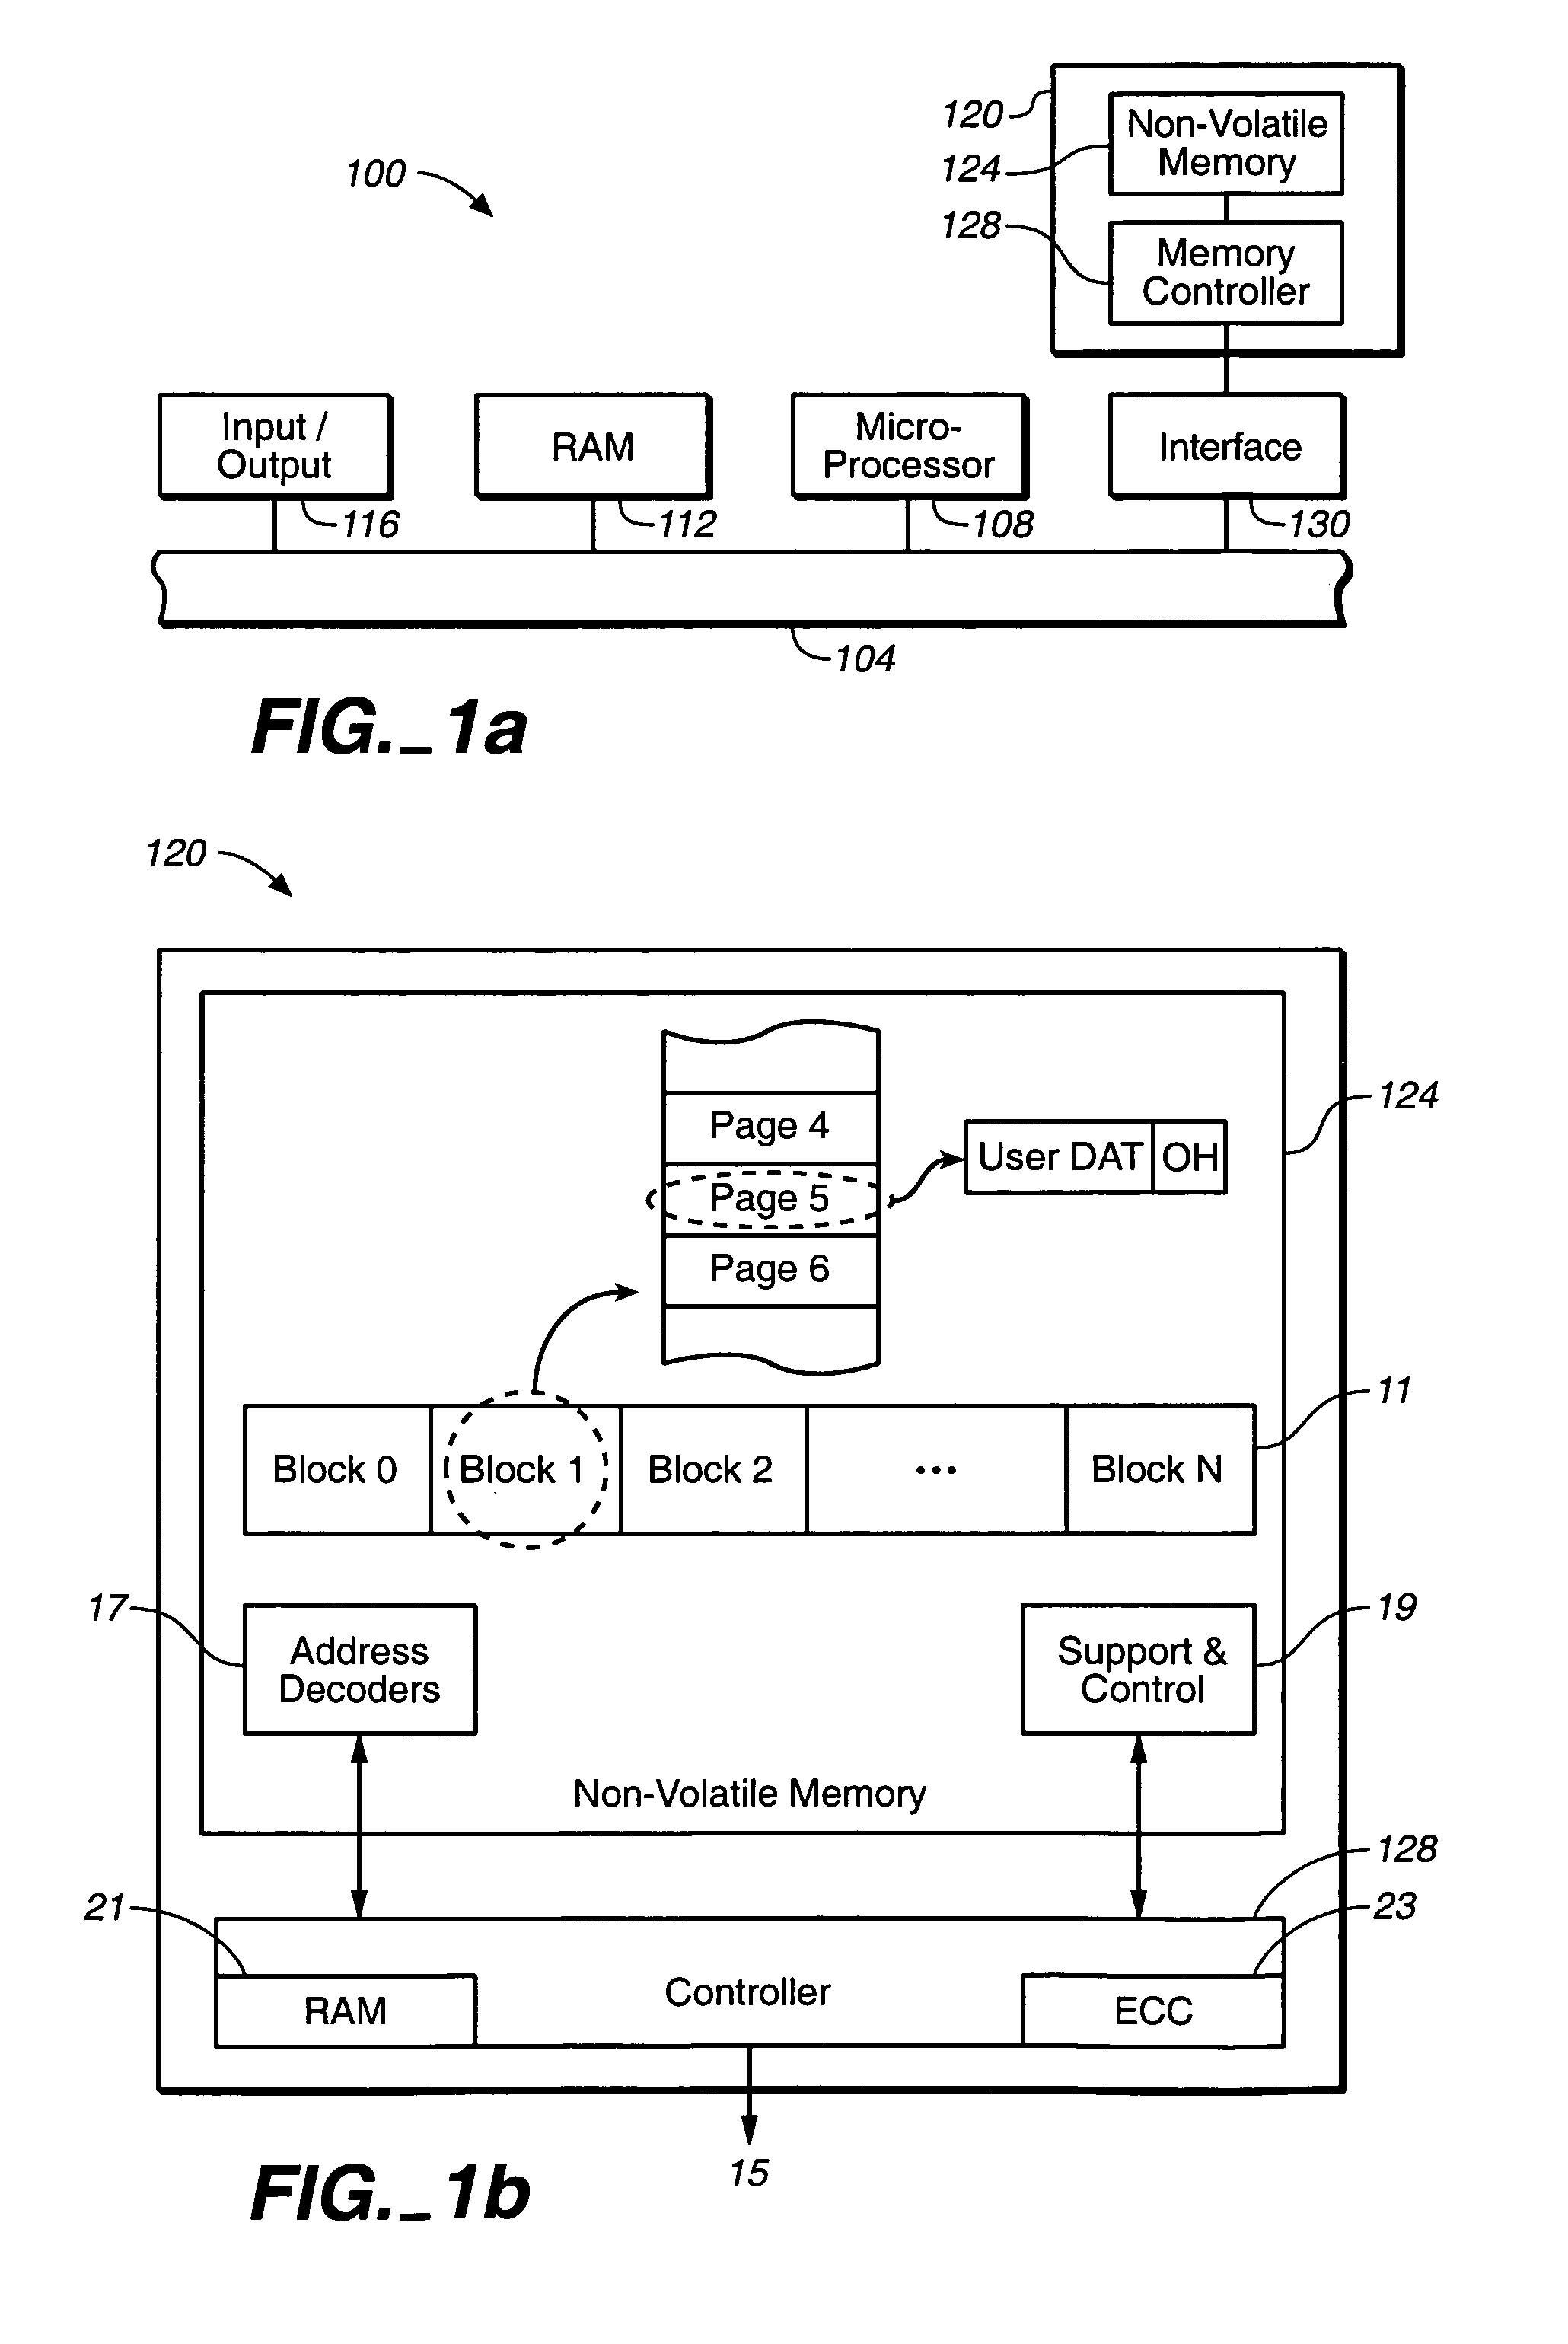 Automated wear leveling in non-volatile storage systems